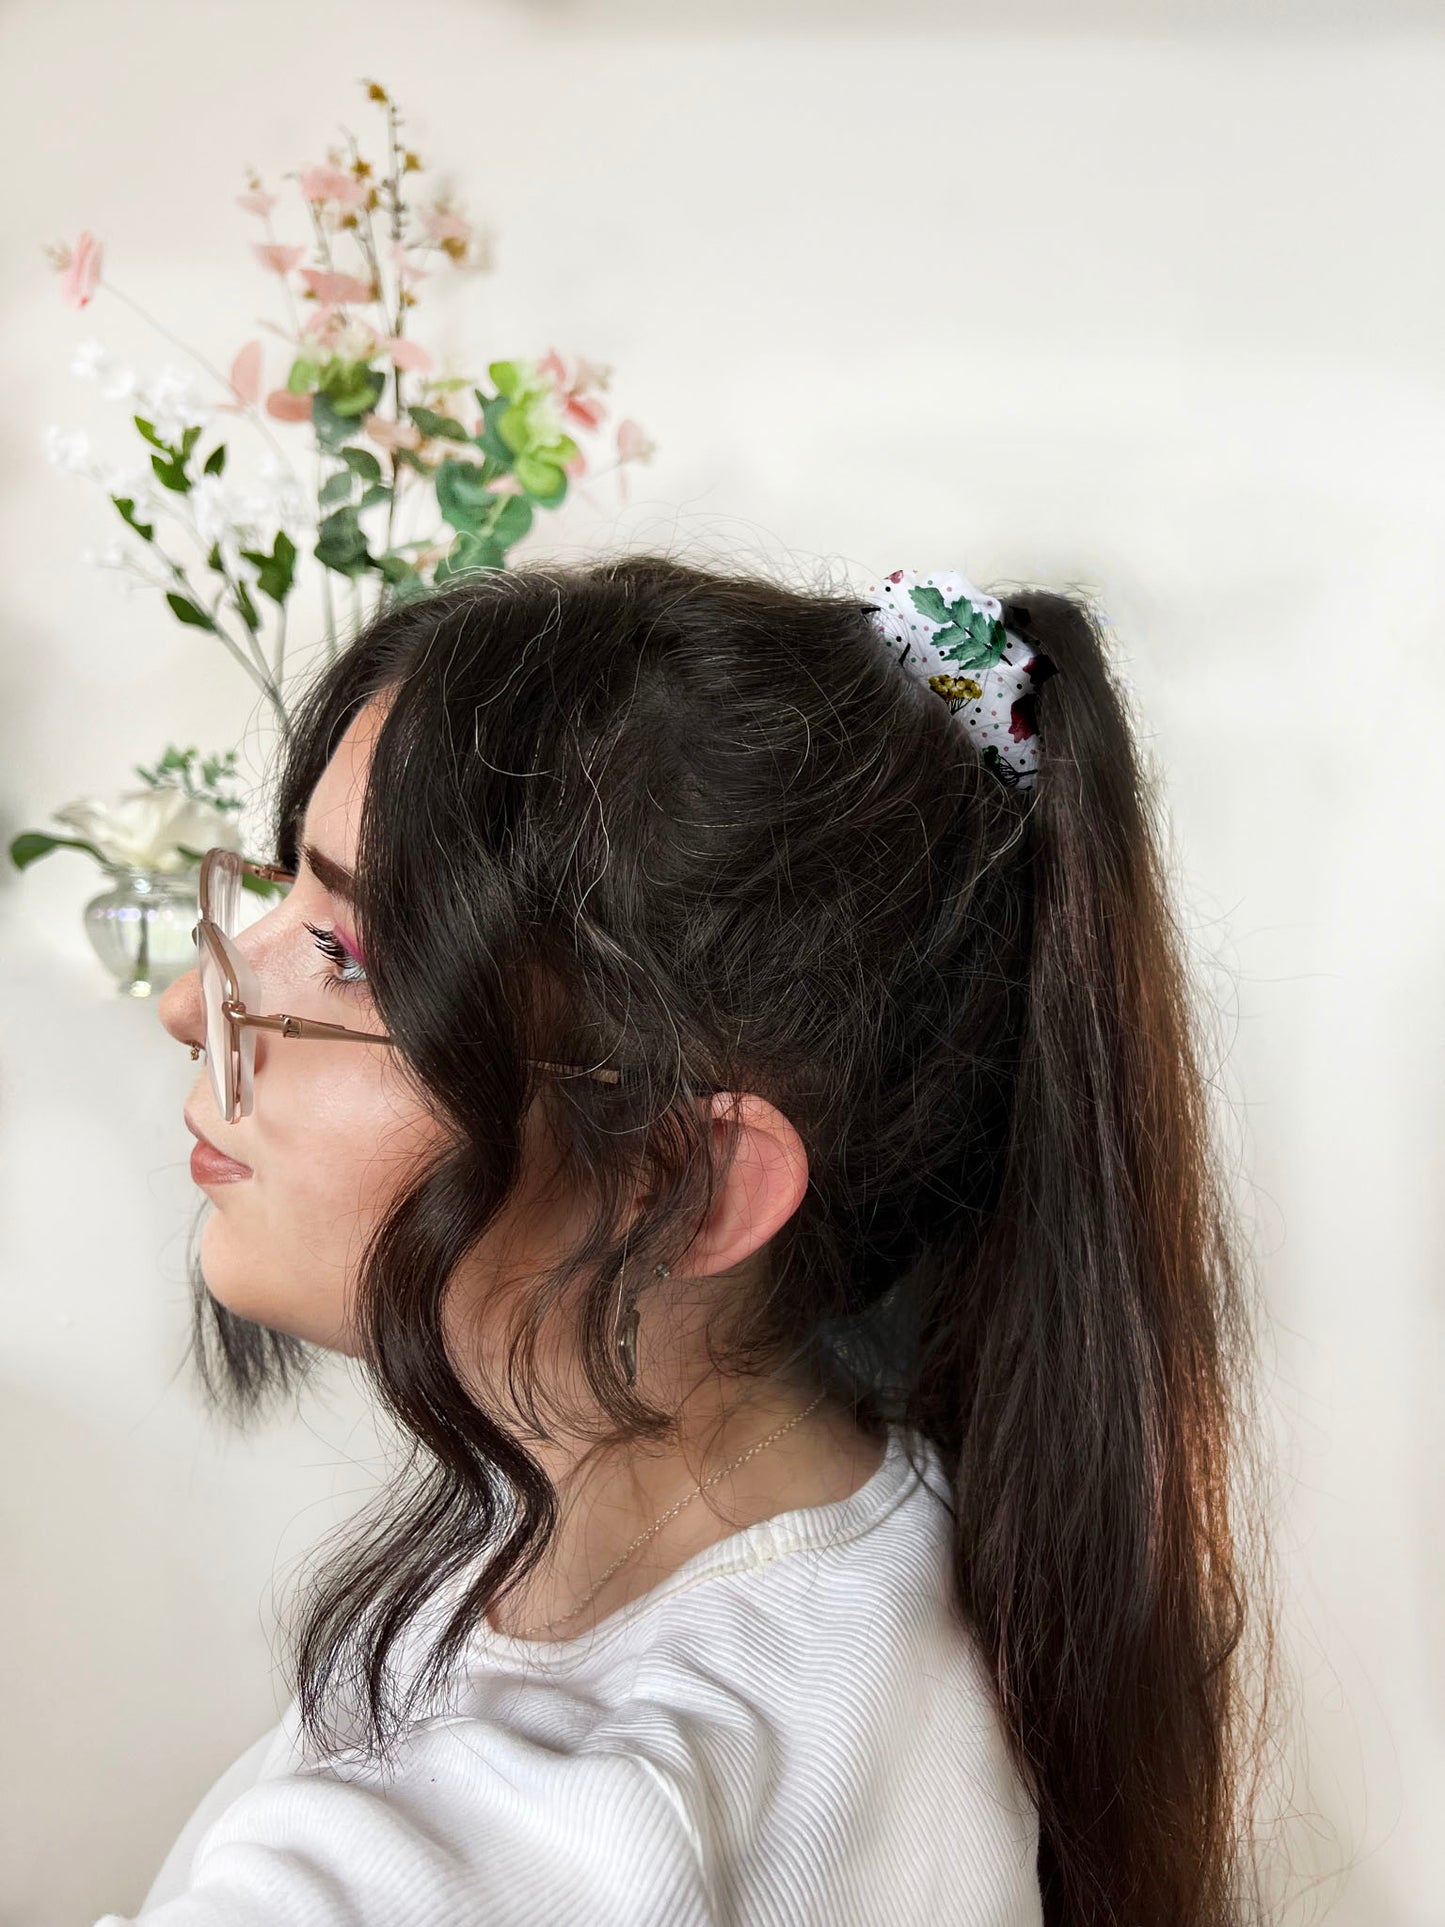 pretty foliage patterned scrunchie in hair of dark haired girl with glasses, facing sideways in white room with plants behind her